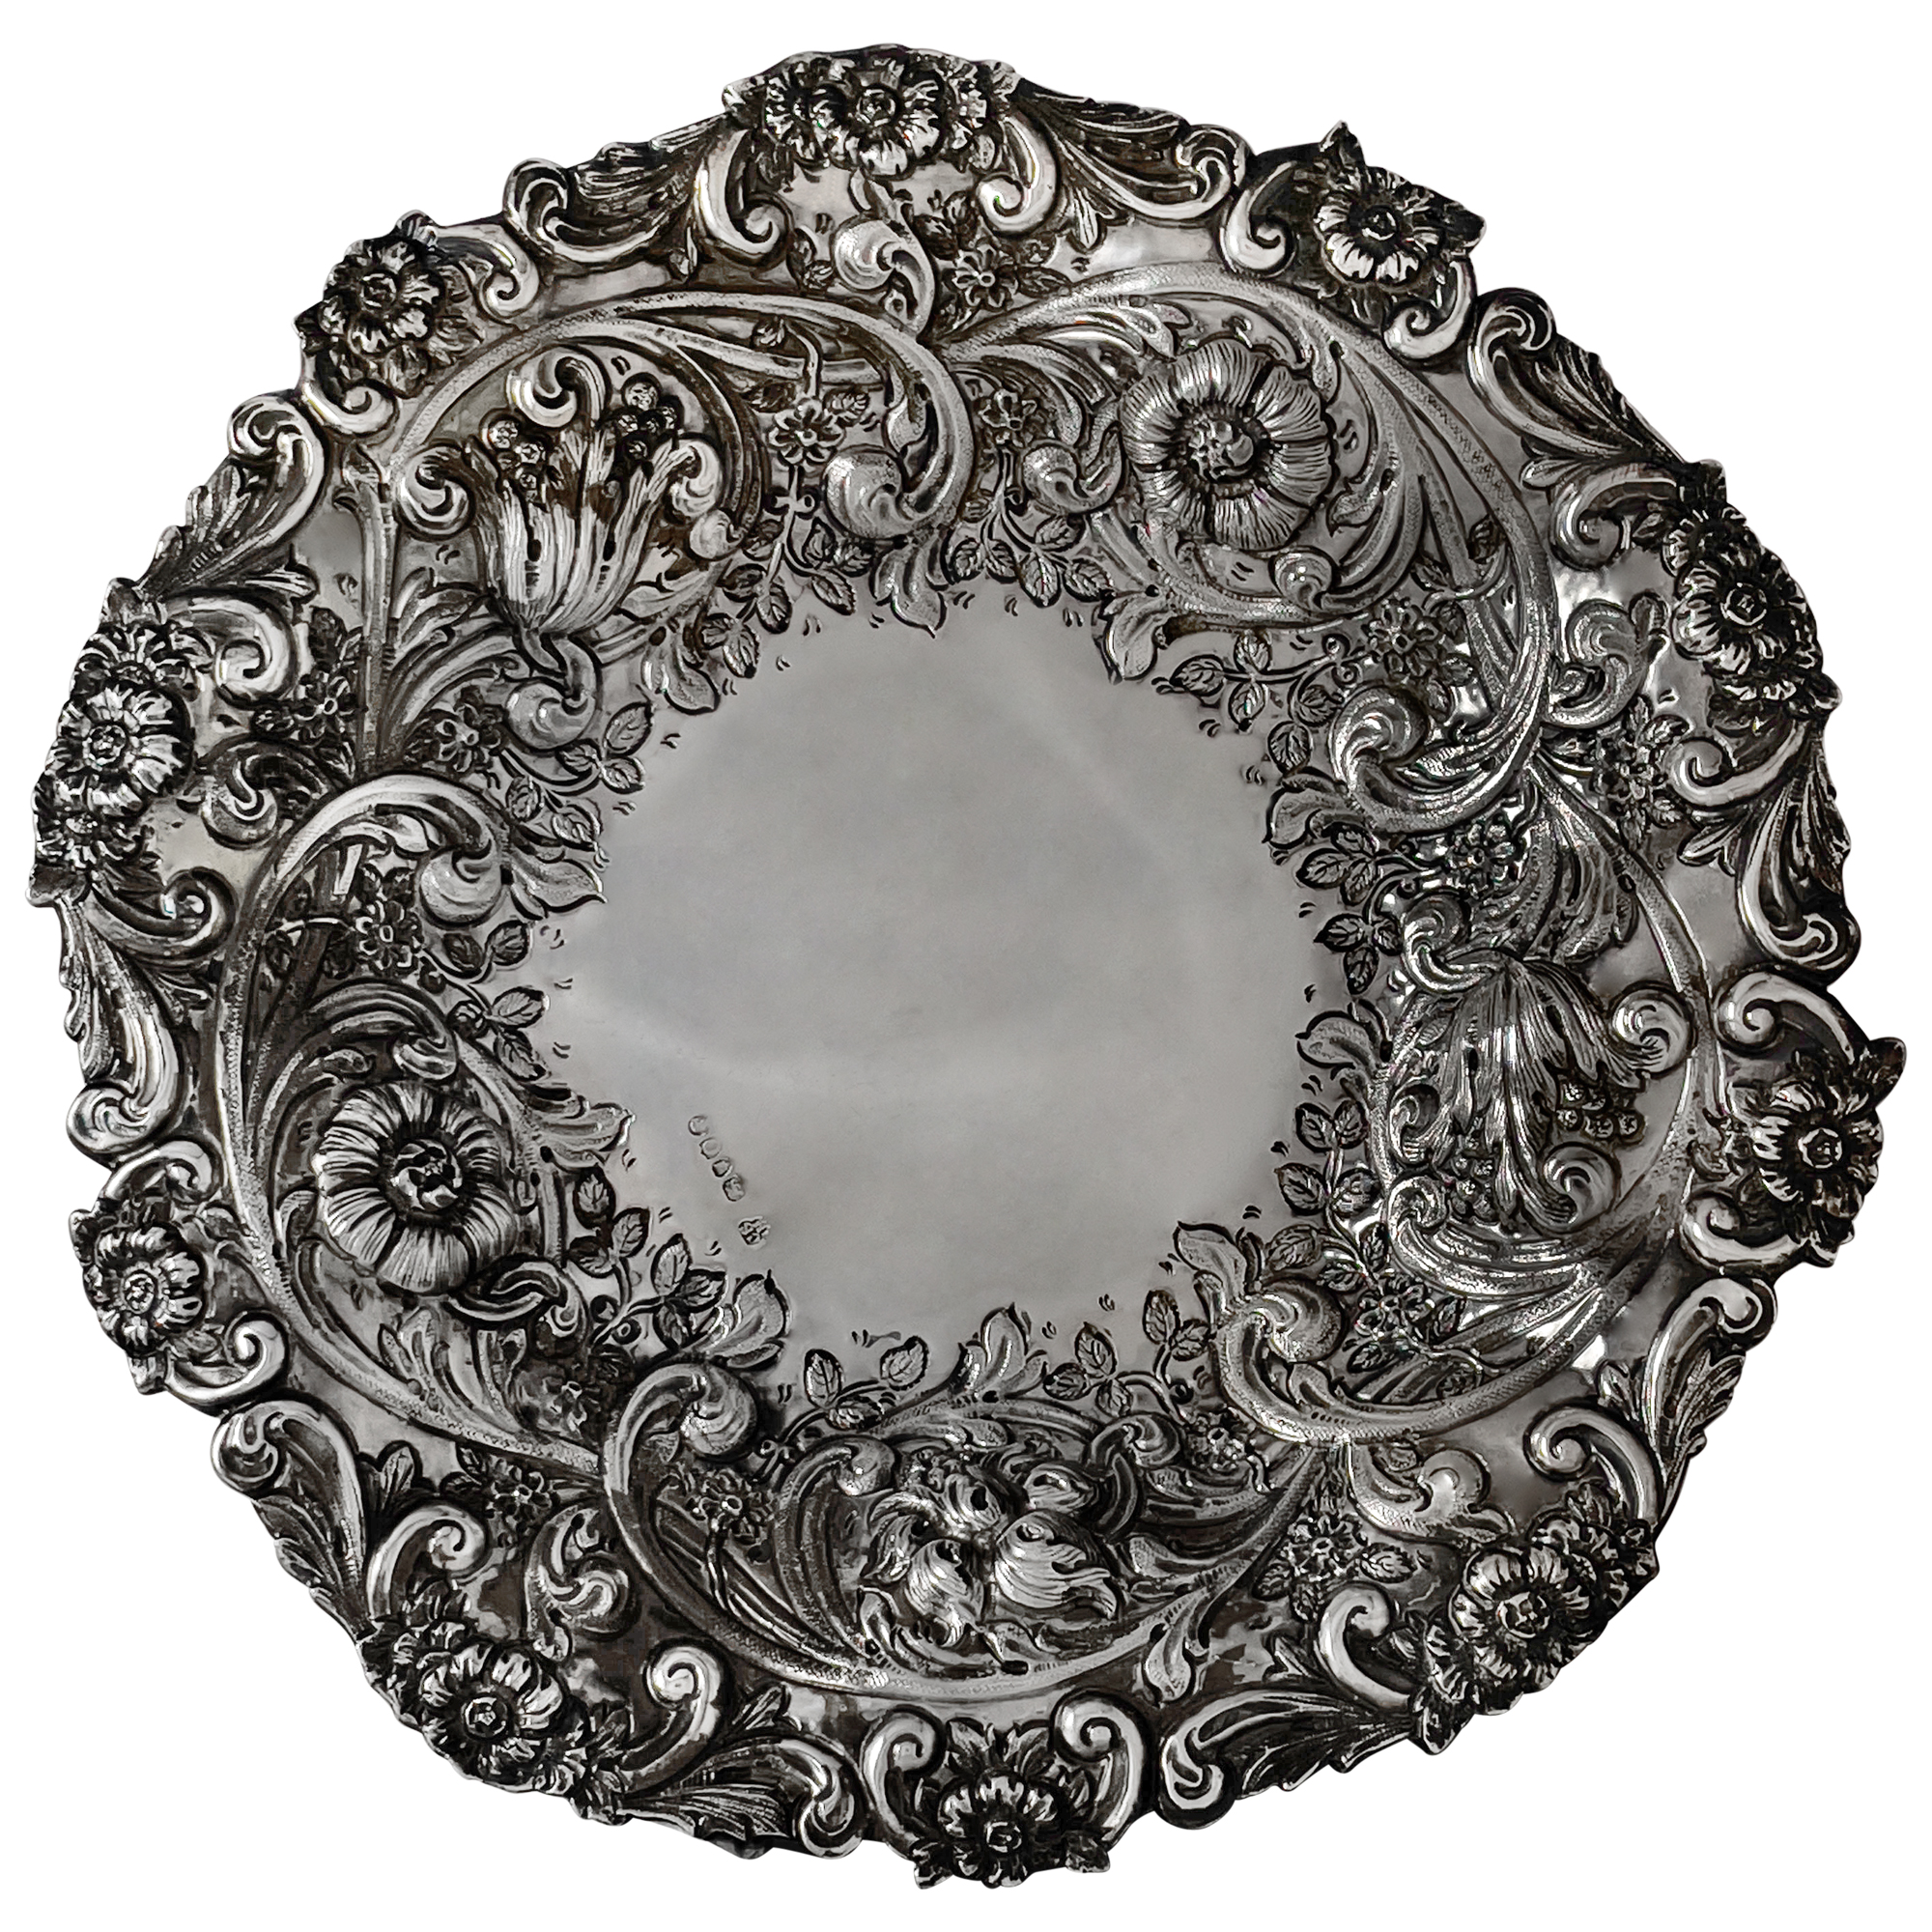 English London Sterling Silver Repousse presentation plate, 1891. Over 7.94 ounce troy of .925 sertling silver. Makers Hallmarks  CSH, for Charles Stuart Harris